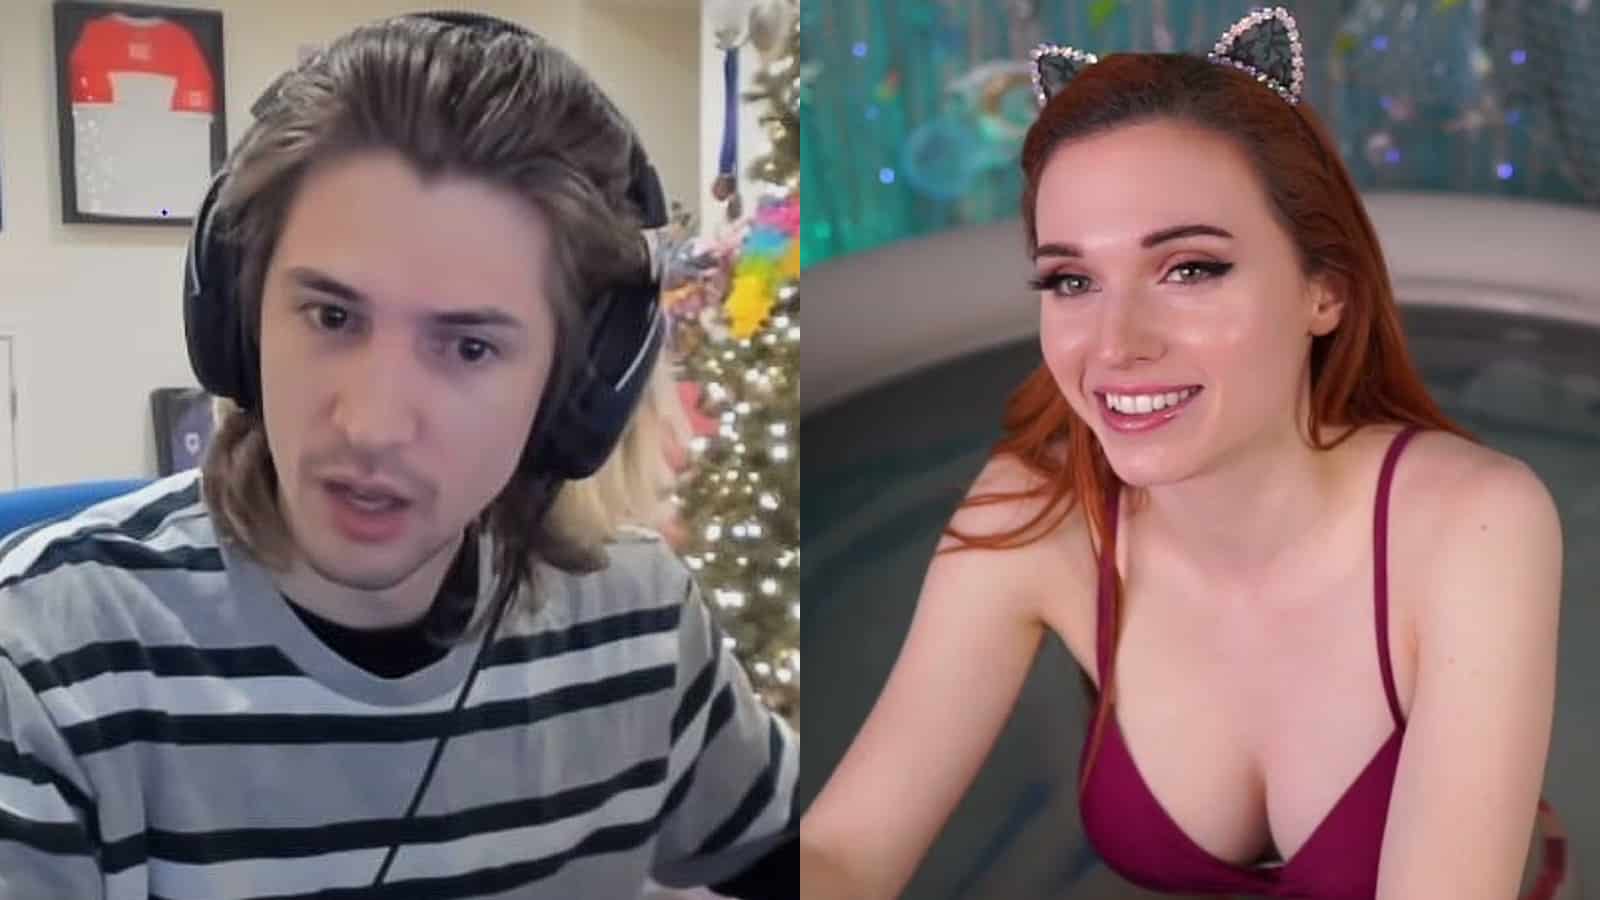 xqc next to hot tub twitch stream from amouranth